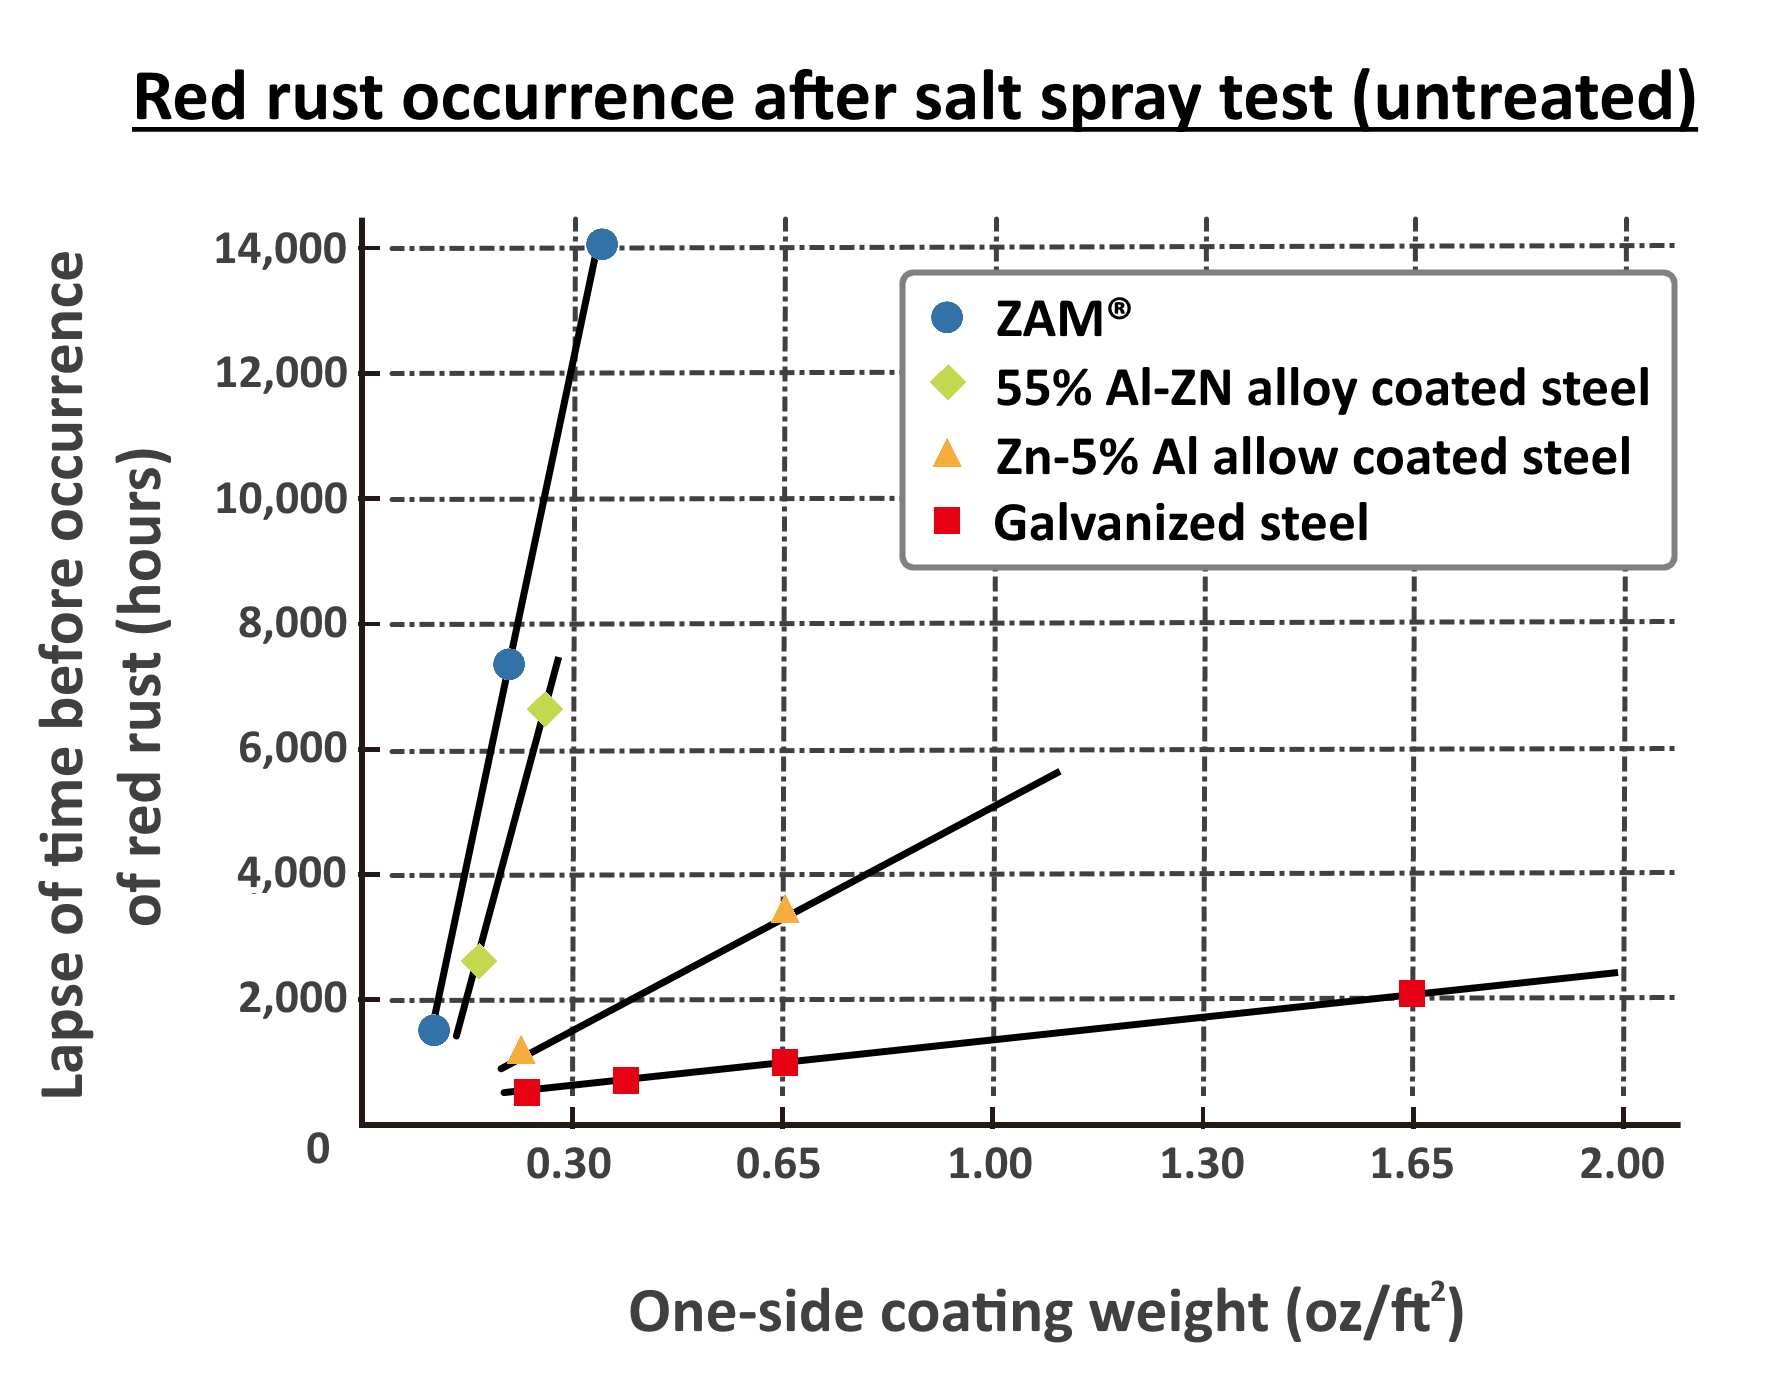 Graph showing corrosion resistance of ZAM® after salt spray test compared to other coated metals